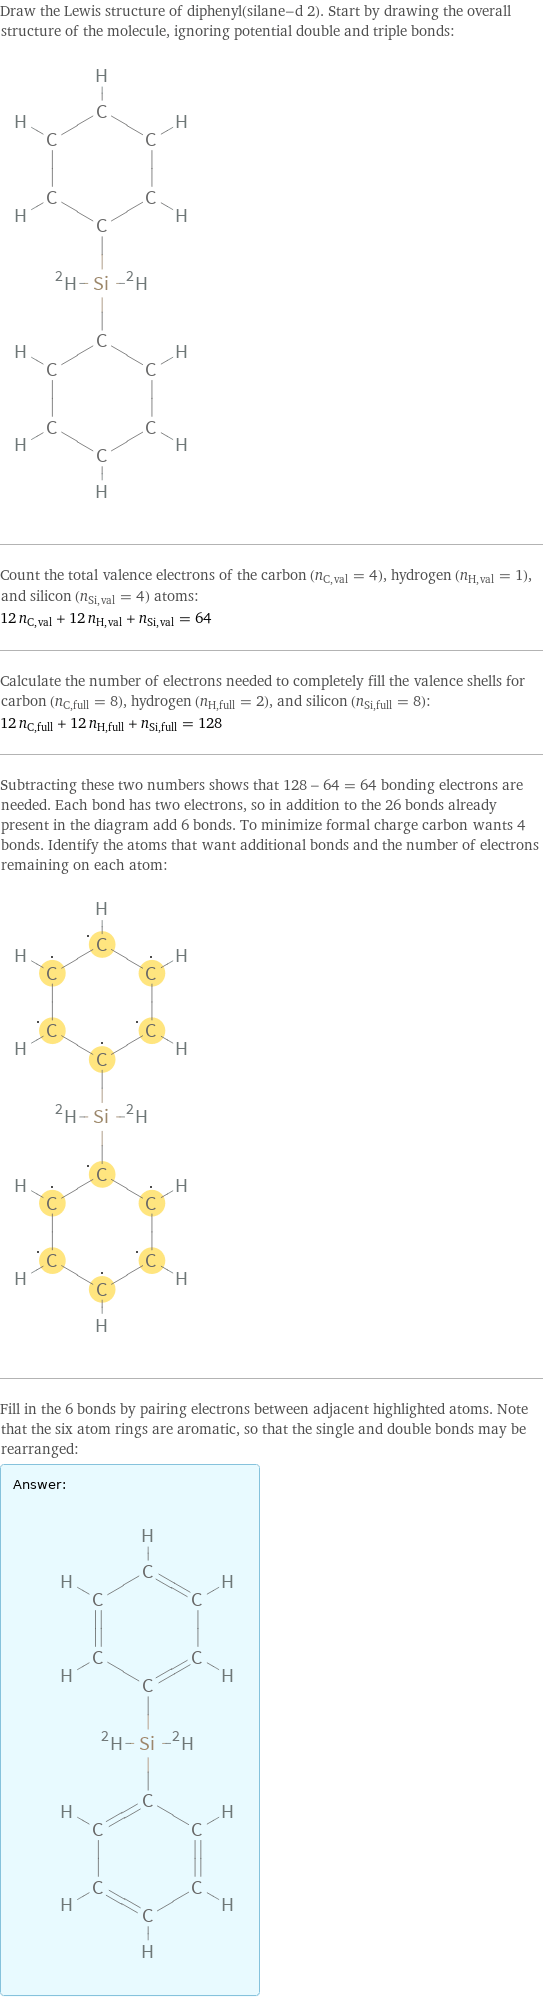 Draw the Lewis structure of diphenyl(silane-d 2). Start by drawing the overall structure of the molecule, ignoring potential double and triple bonds:  Count the total valence electrons of the carbon (n_C, val = 4), hydrogen (n_H, val = 1), and silicon (n_Si, val = 4) atoms: 12 n_C, val + 12 n_H, val + n_Si, val = 64 Calculate the number of electrons needed to completely fill the valence shells for carbon (n_C, full = 8), hydrogen (n_H, full = 2), and silicon (n_Si, full = 8): 12 n_C, full + 12 n_H, full + n_Si, full = 128 Subtracting these two numbers shows that 128 - 64 = 64 bonding electrons are needed. Each bond has two electrons, so in addition to the 26 bonds already present in the diagram add 6 bonds. To minimize formal charge carbon wants 4 bonds. Identify the atoms that want additional bonds and the number of electrons remaining on each atom:  Fill in the 6 bonds by pairing electrons between adjacent highlighted atoms. Note that the six atom rings are aromatic, so that the single and double bonds may be rearranged: Answer: |   | 